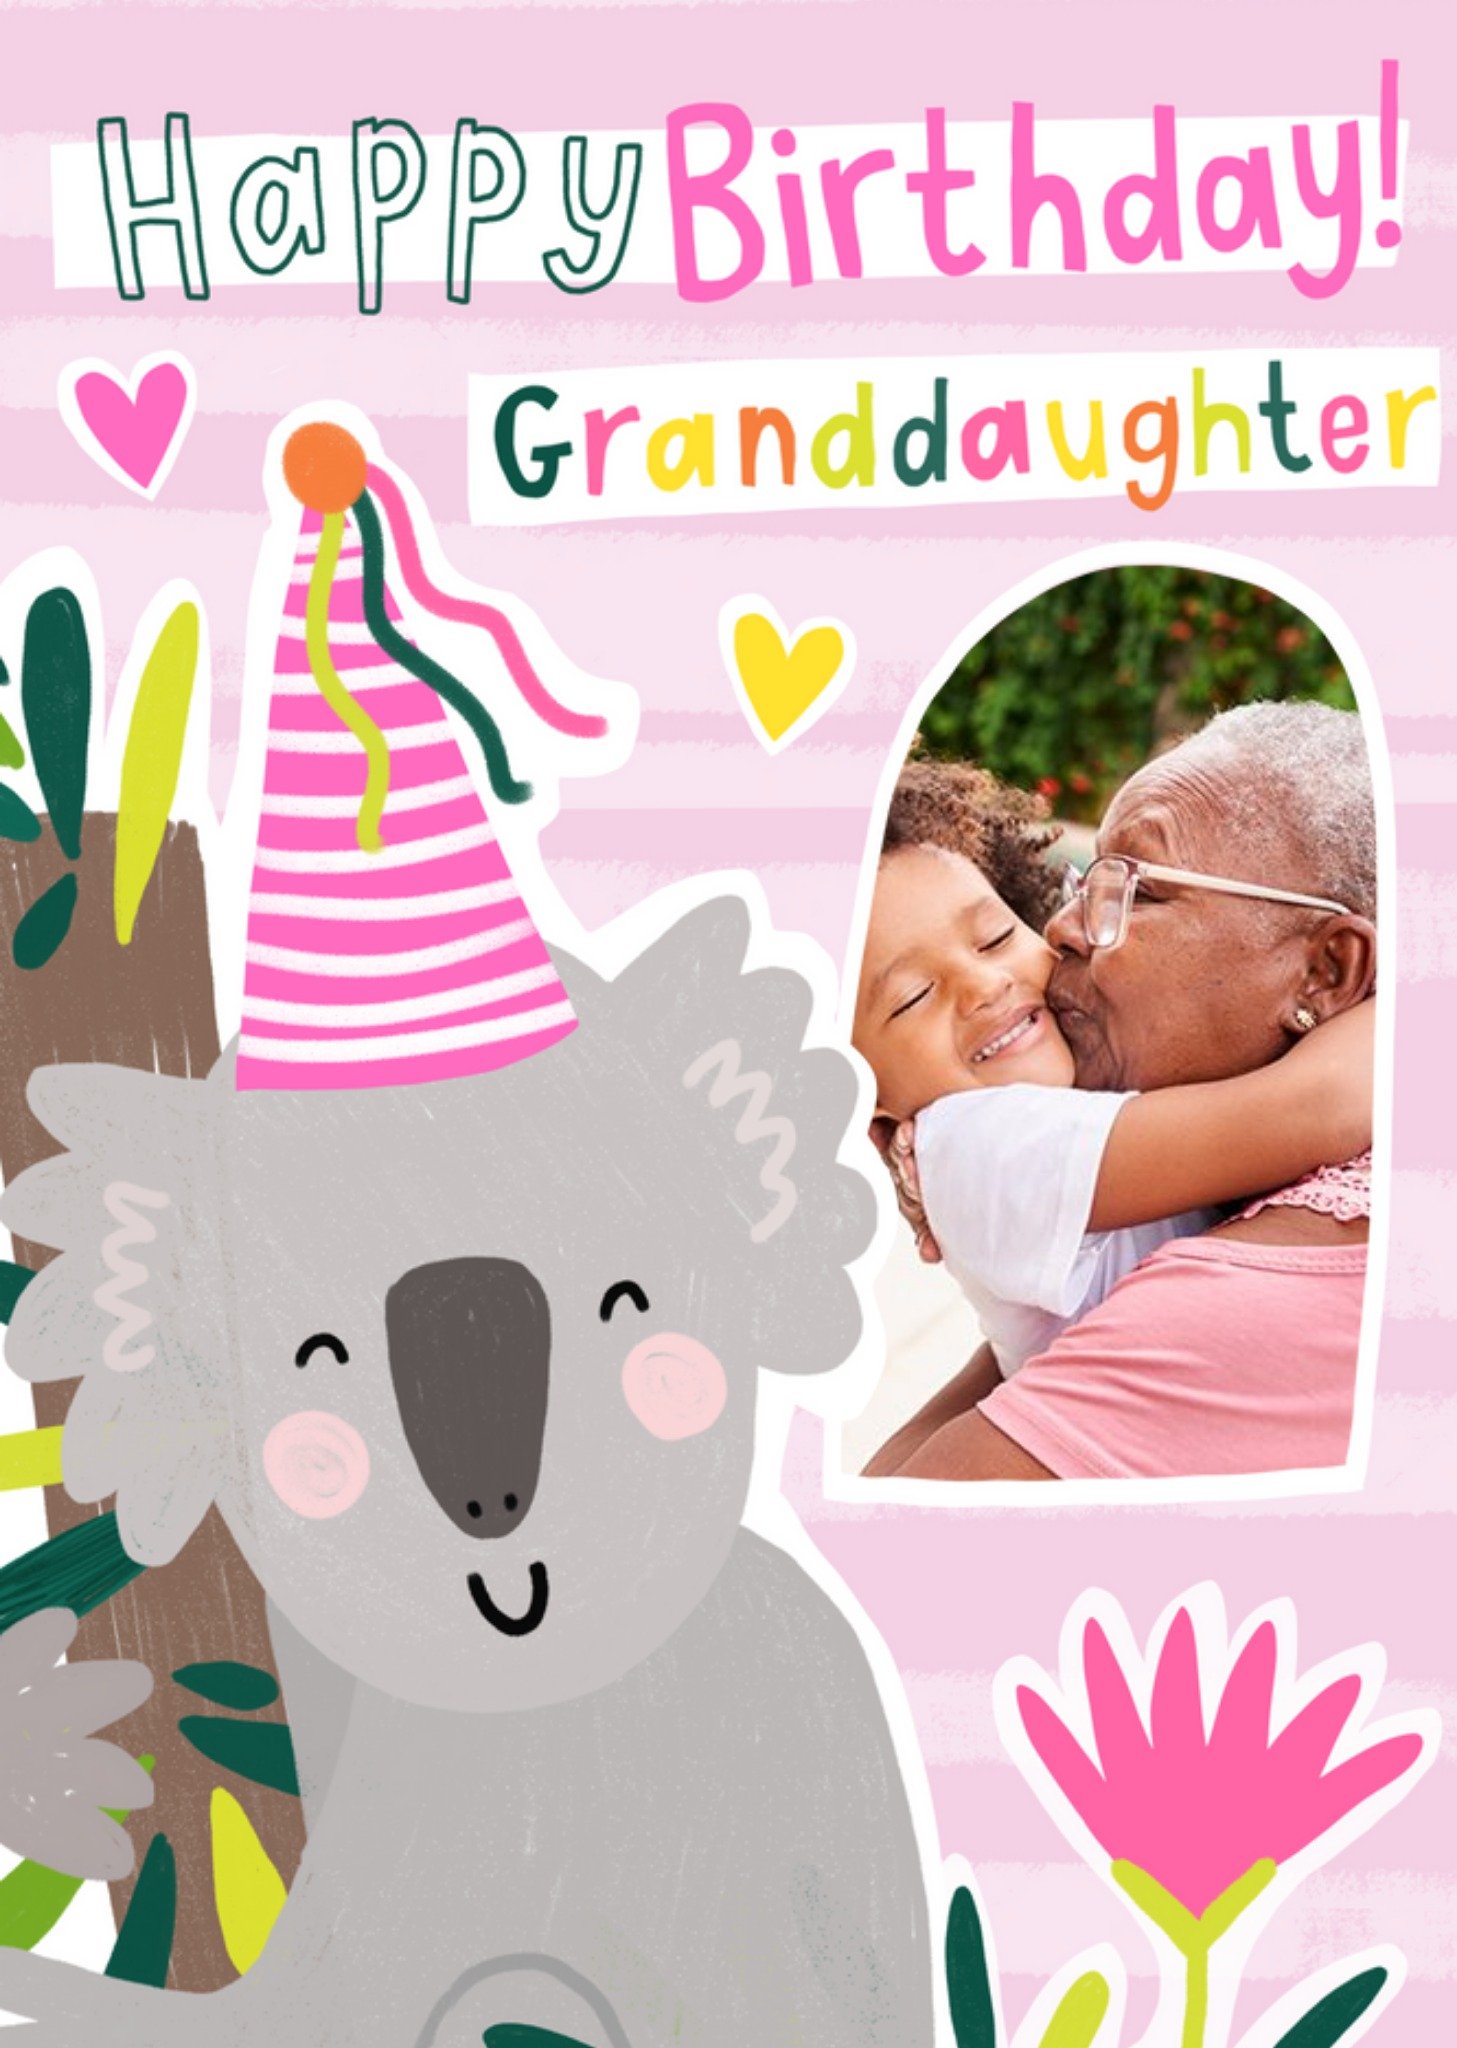 Love Hearts Party Pals Illustrated Koala Photo Upload Granddaughter Birthday Card, Large